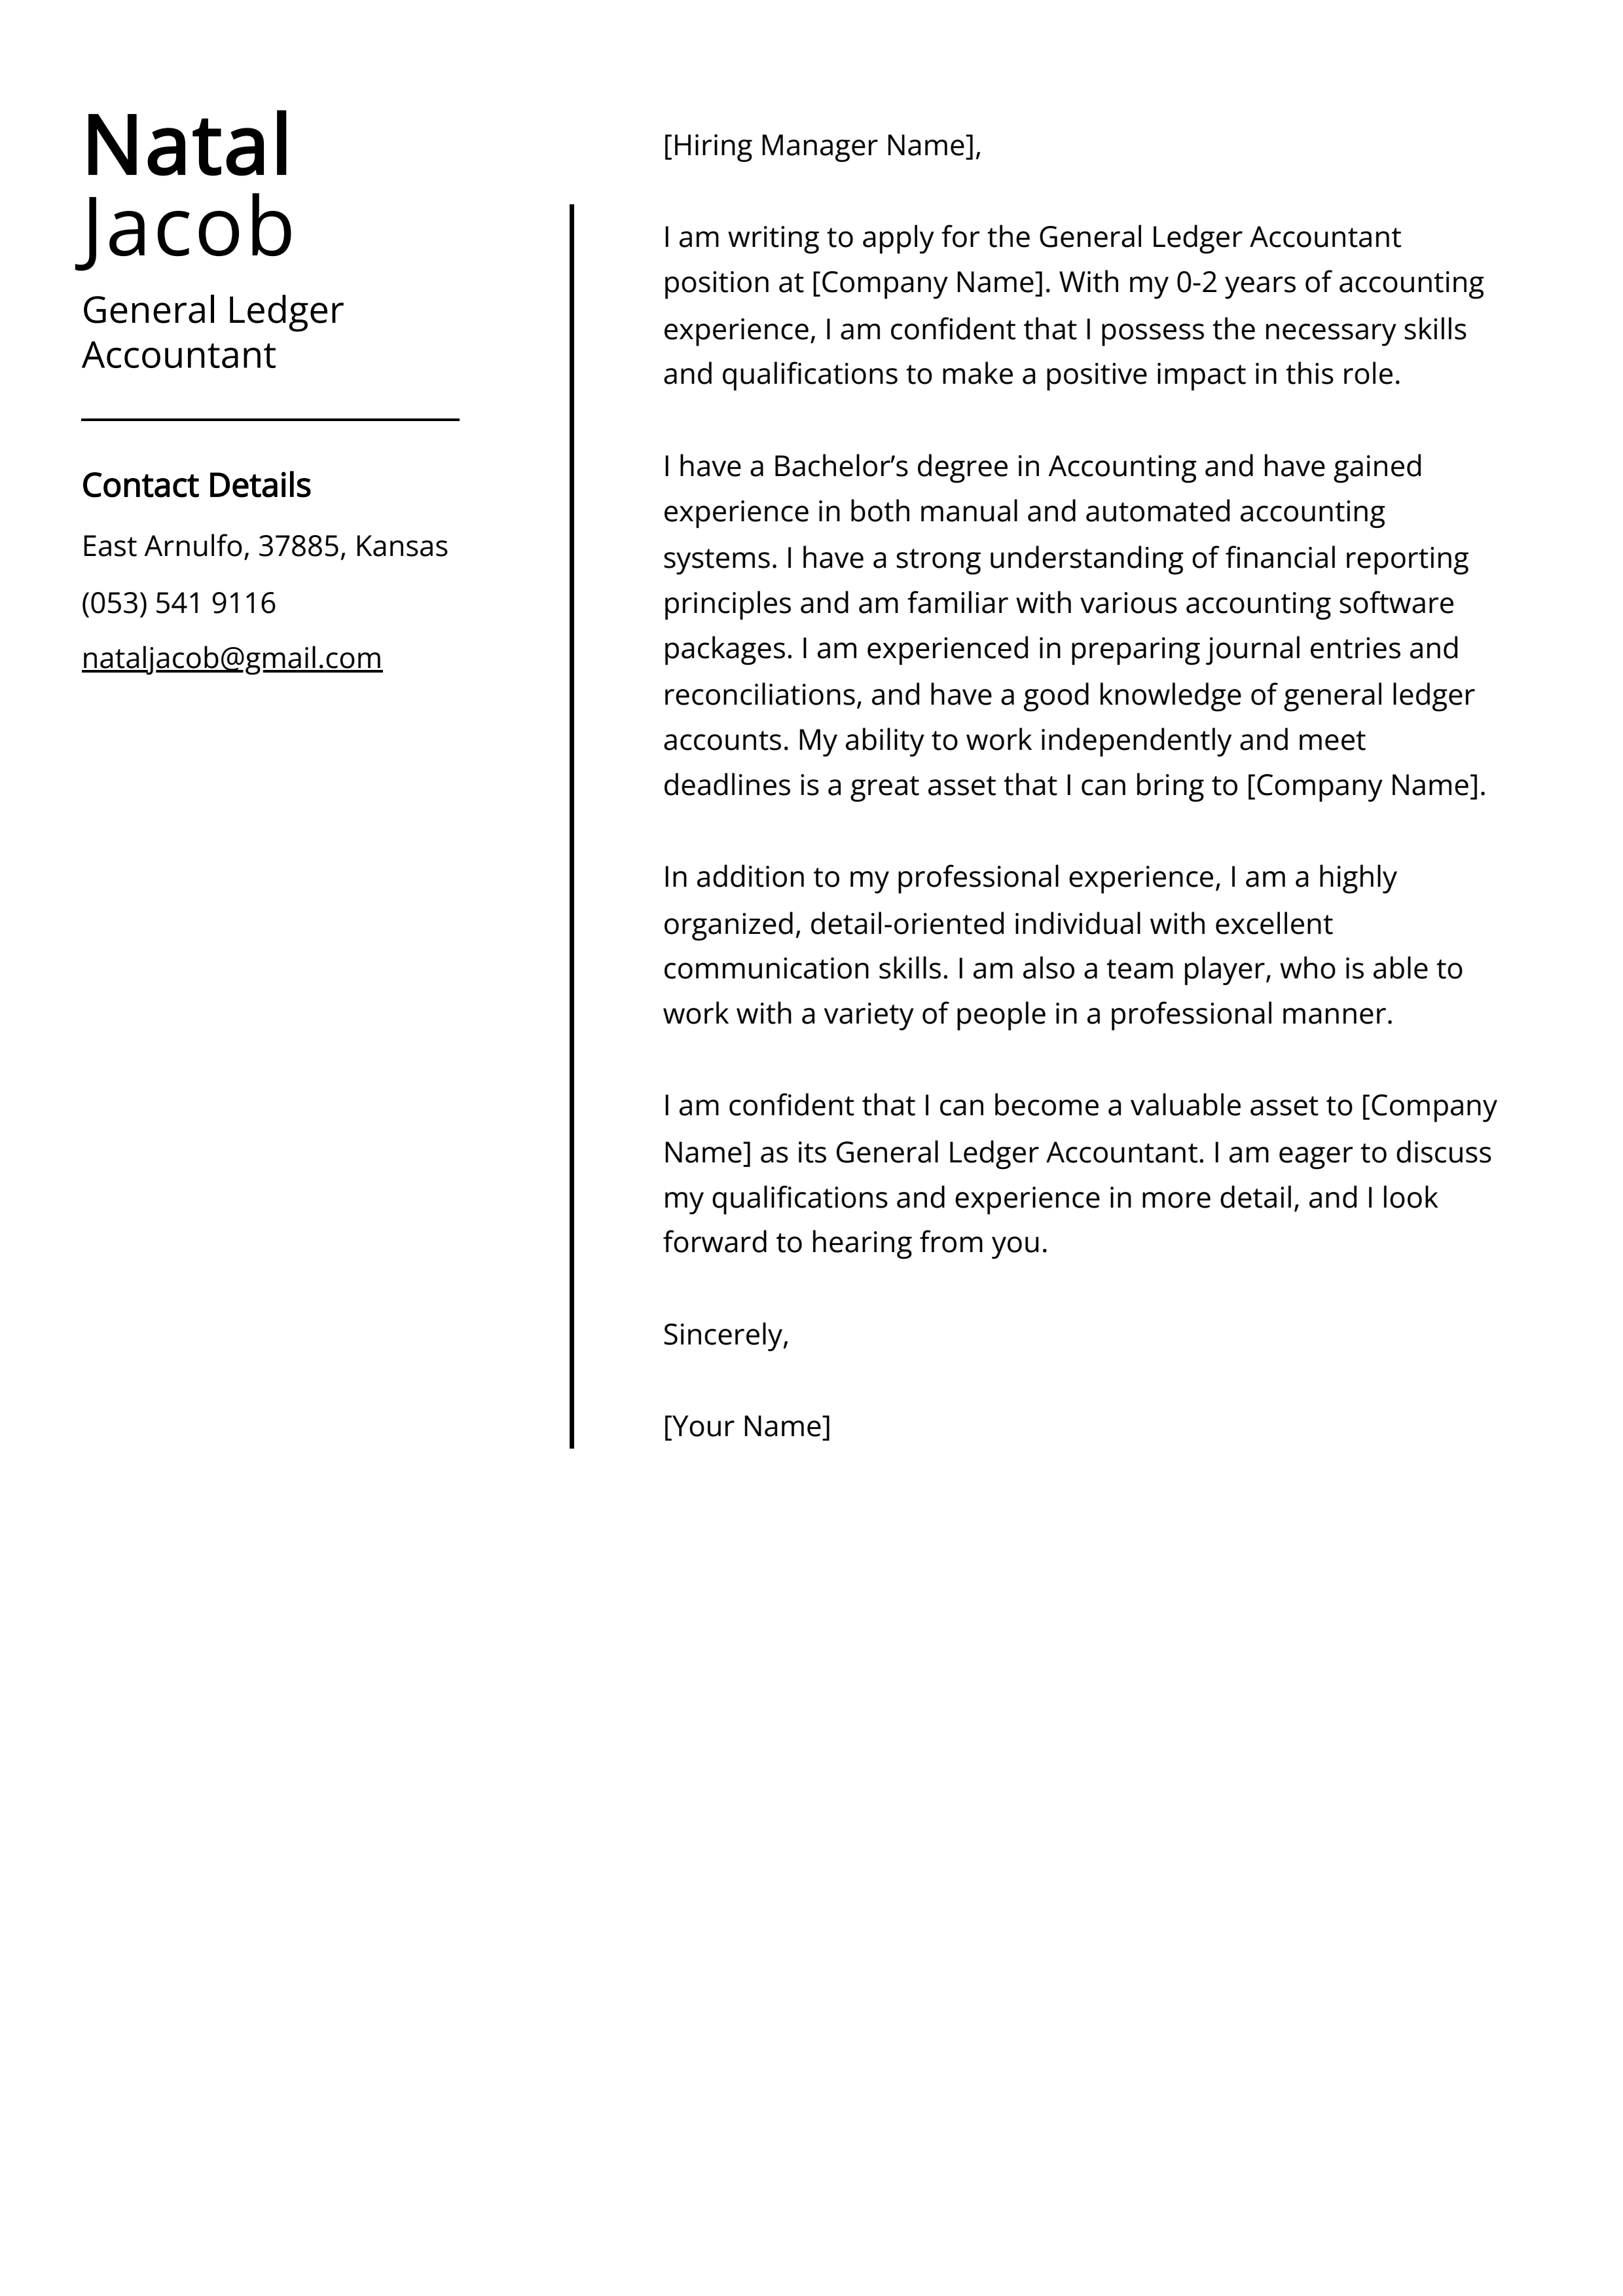 General Ledger Accountant Cover Letter Example